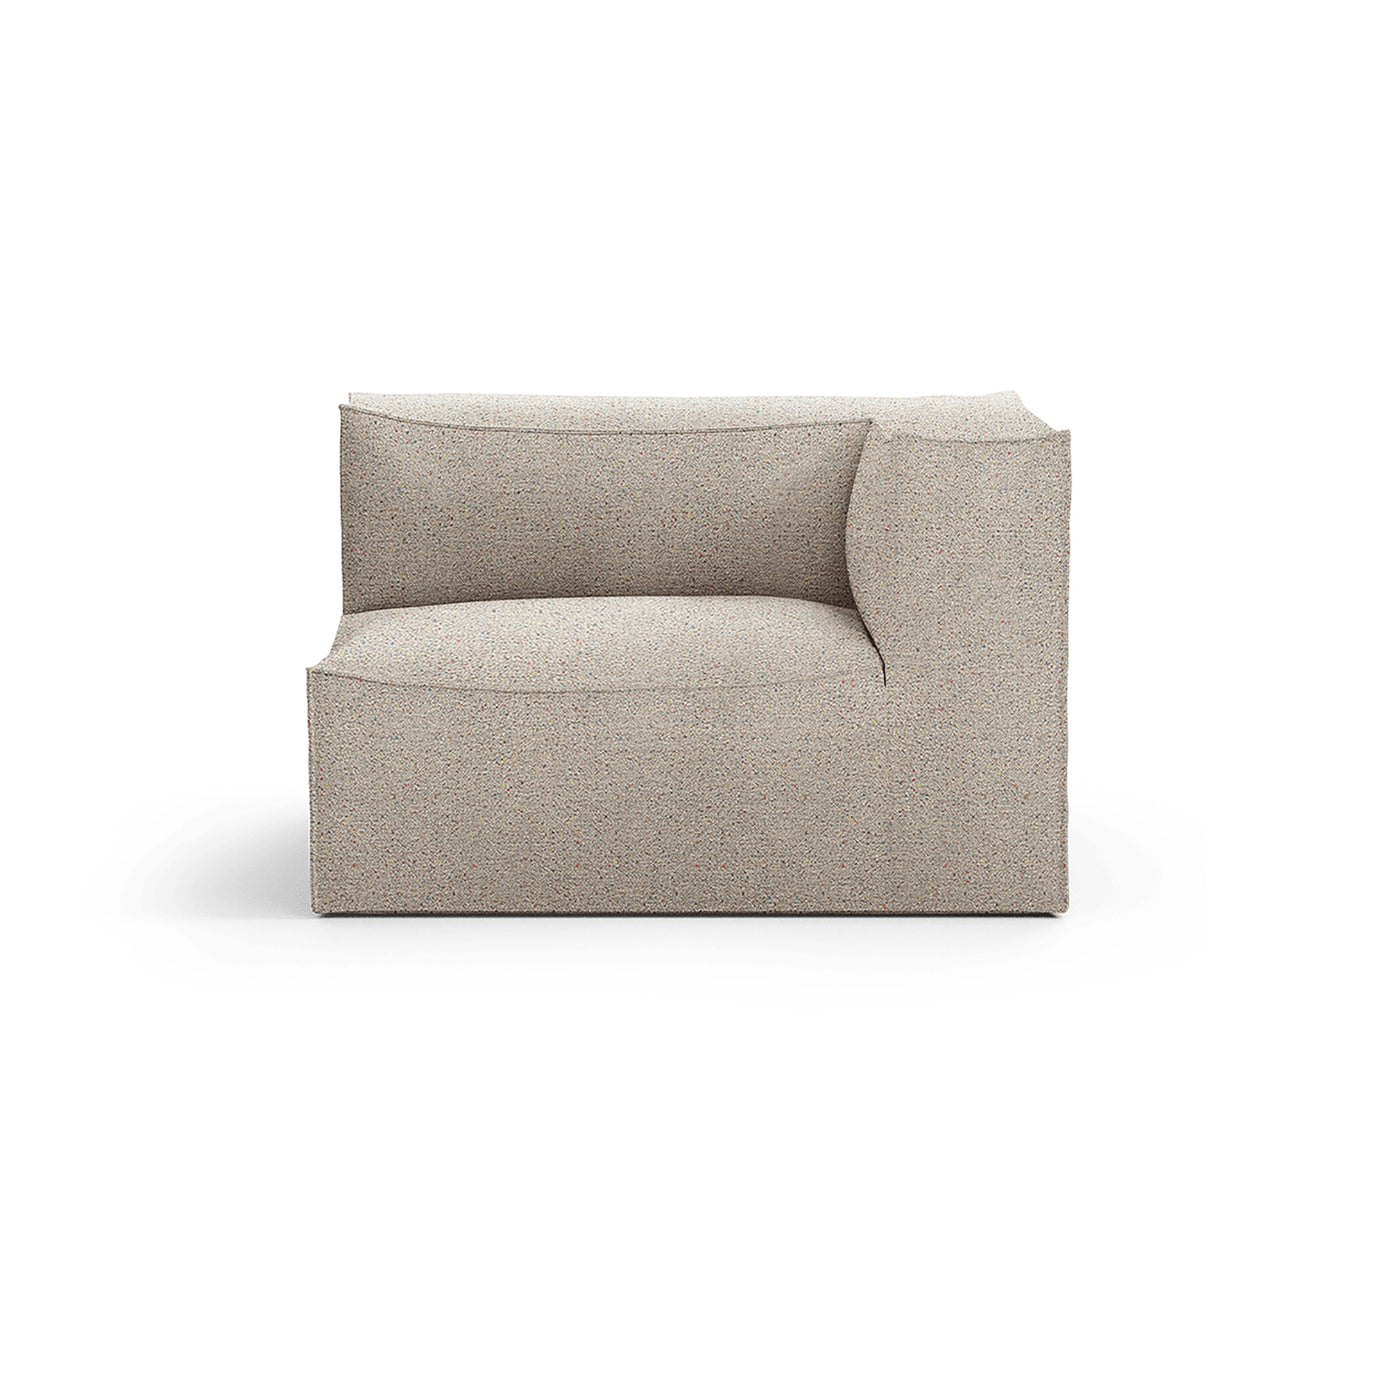 ferm LIVING Catena Modular sofas S401. Made-to-order at someday designs. #colour_light-grey-confetti-boucle